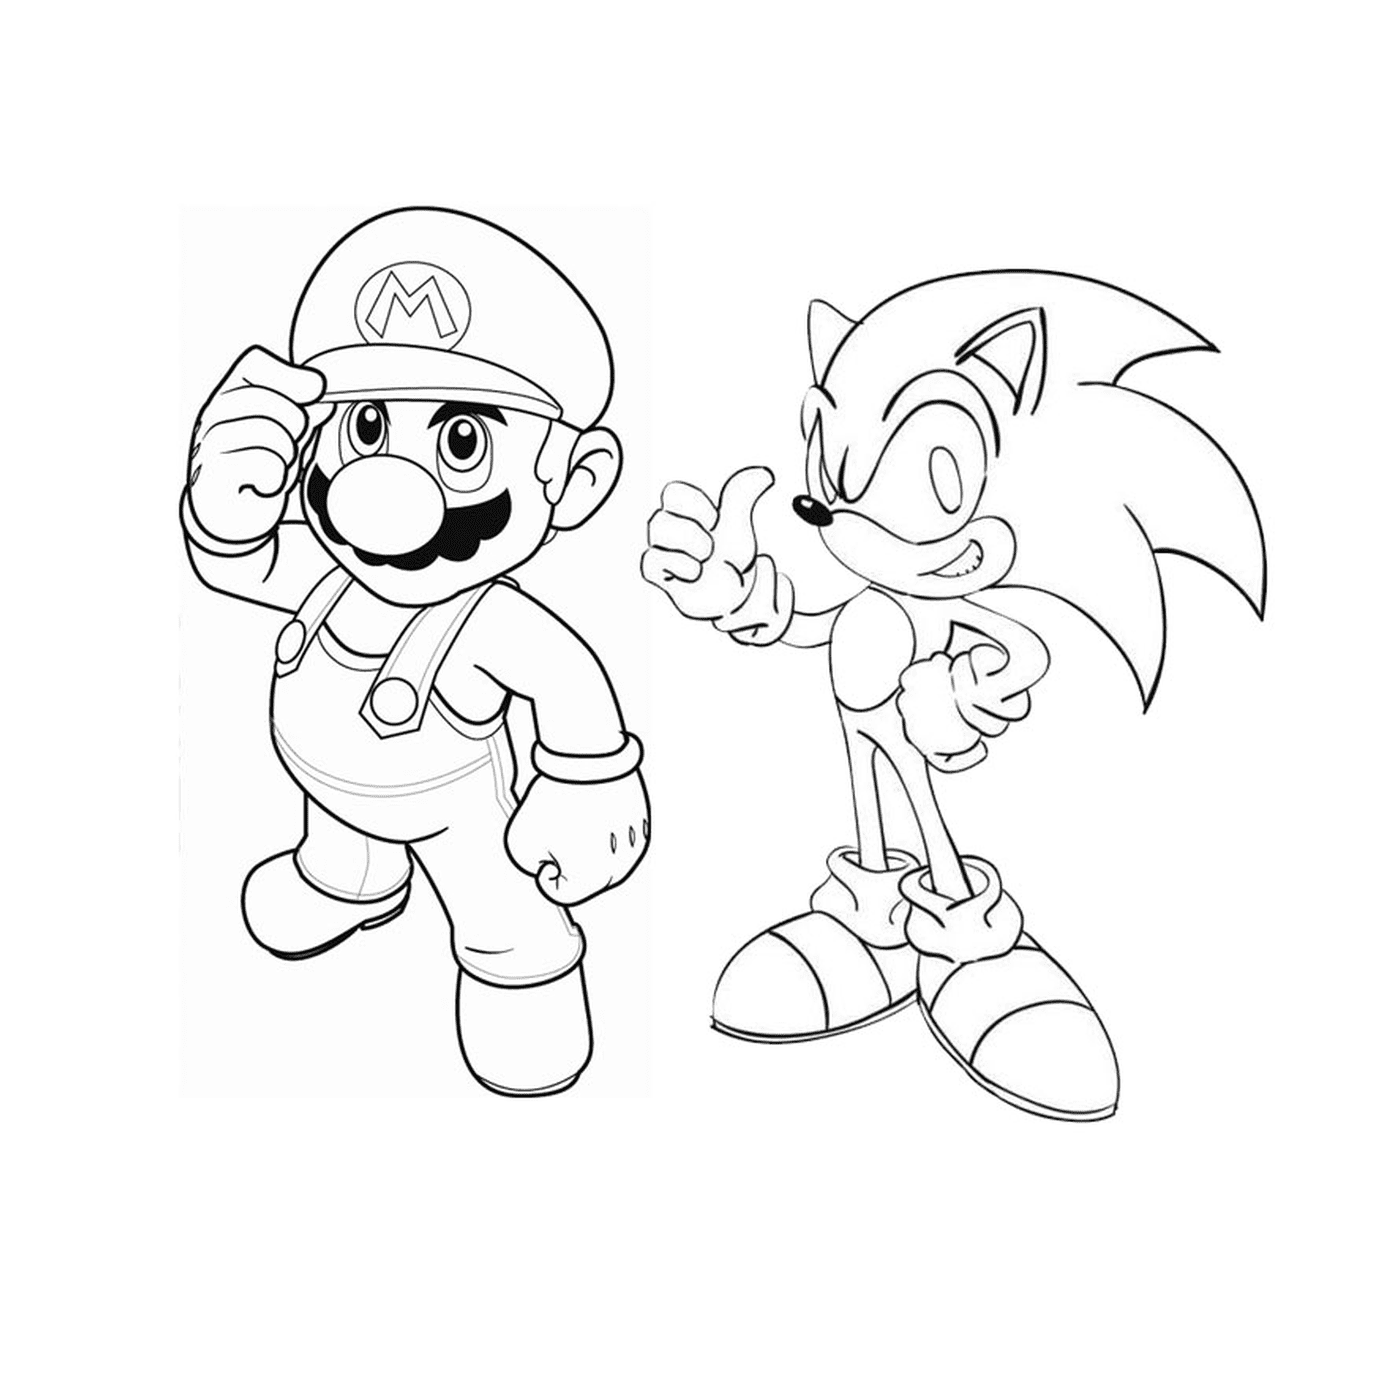  Sonic the hedgehog and Mario 